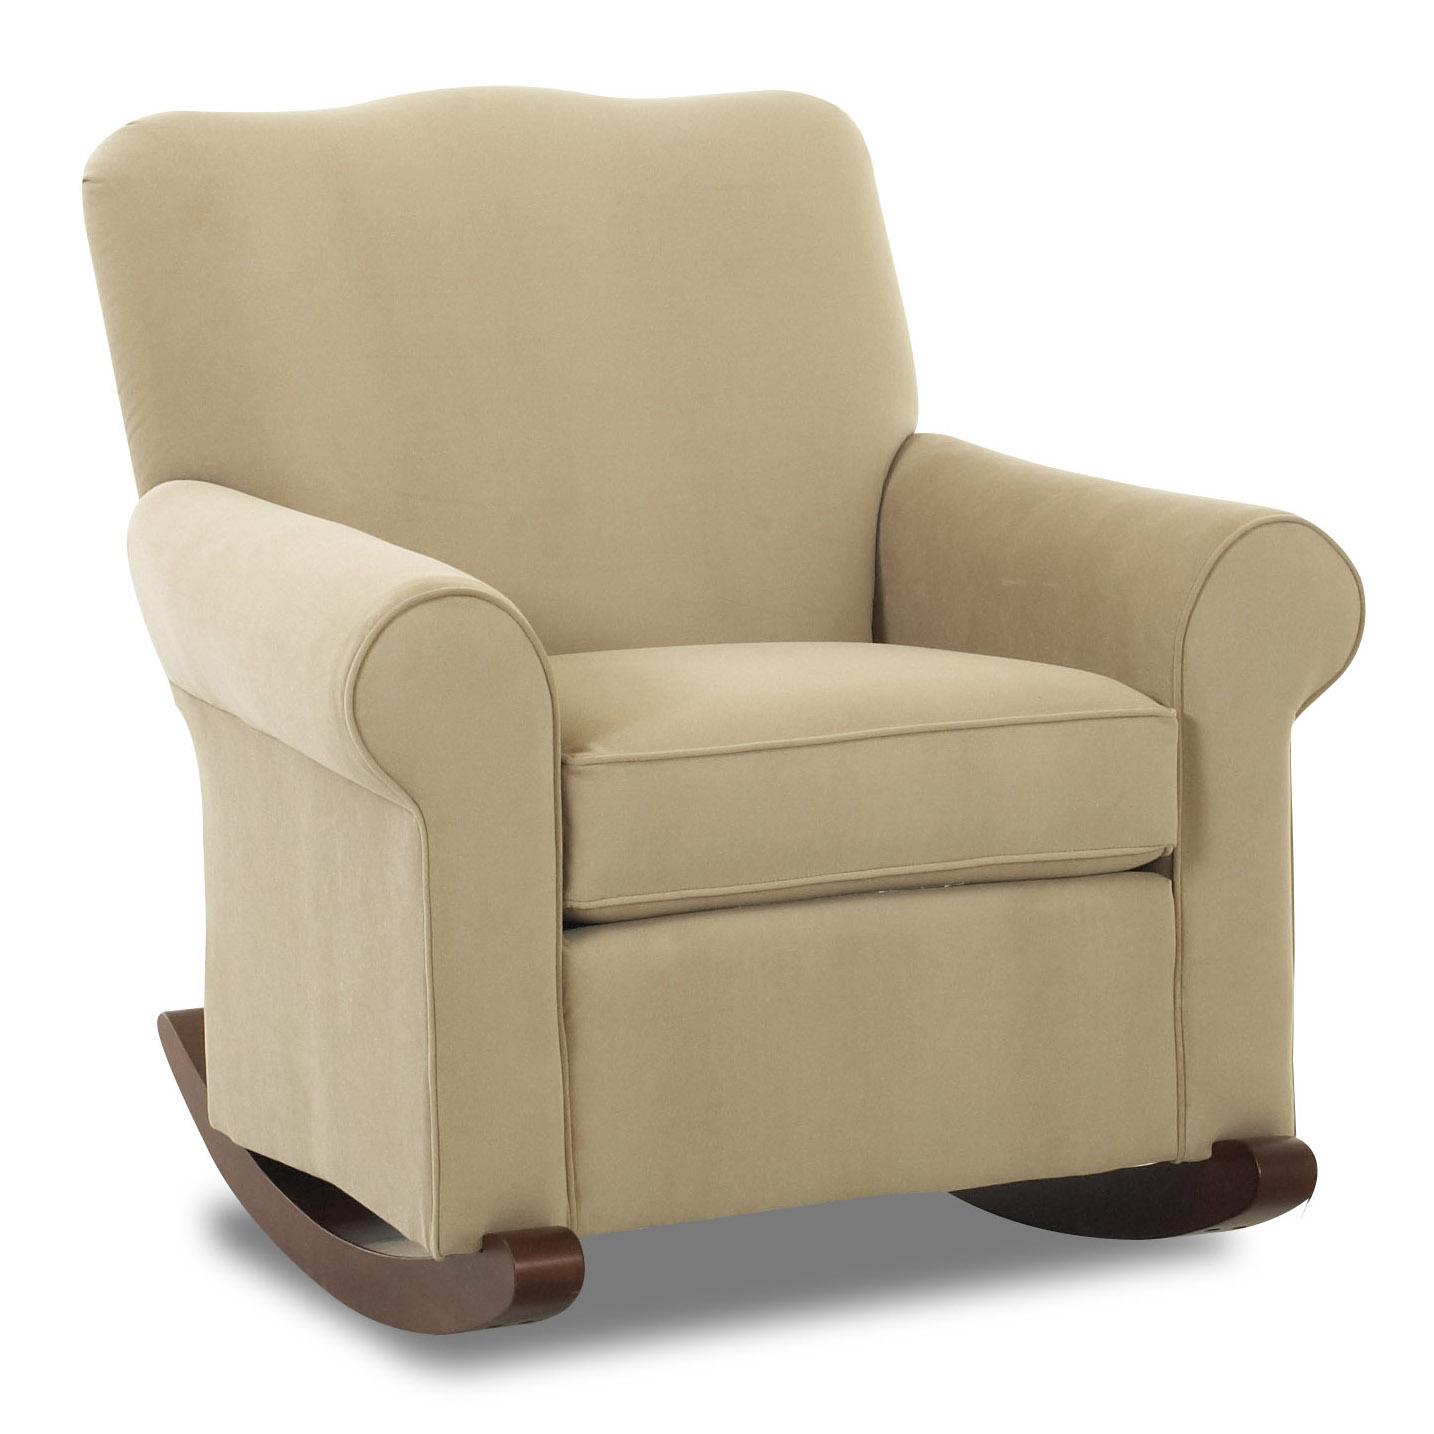 padded rocker chair klaussner chairs and accents c b